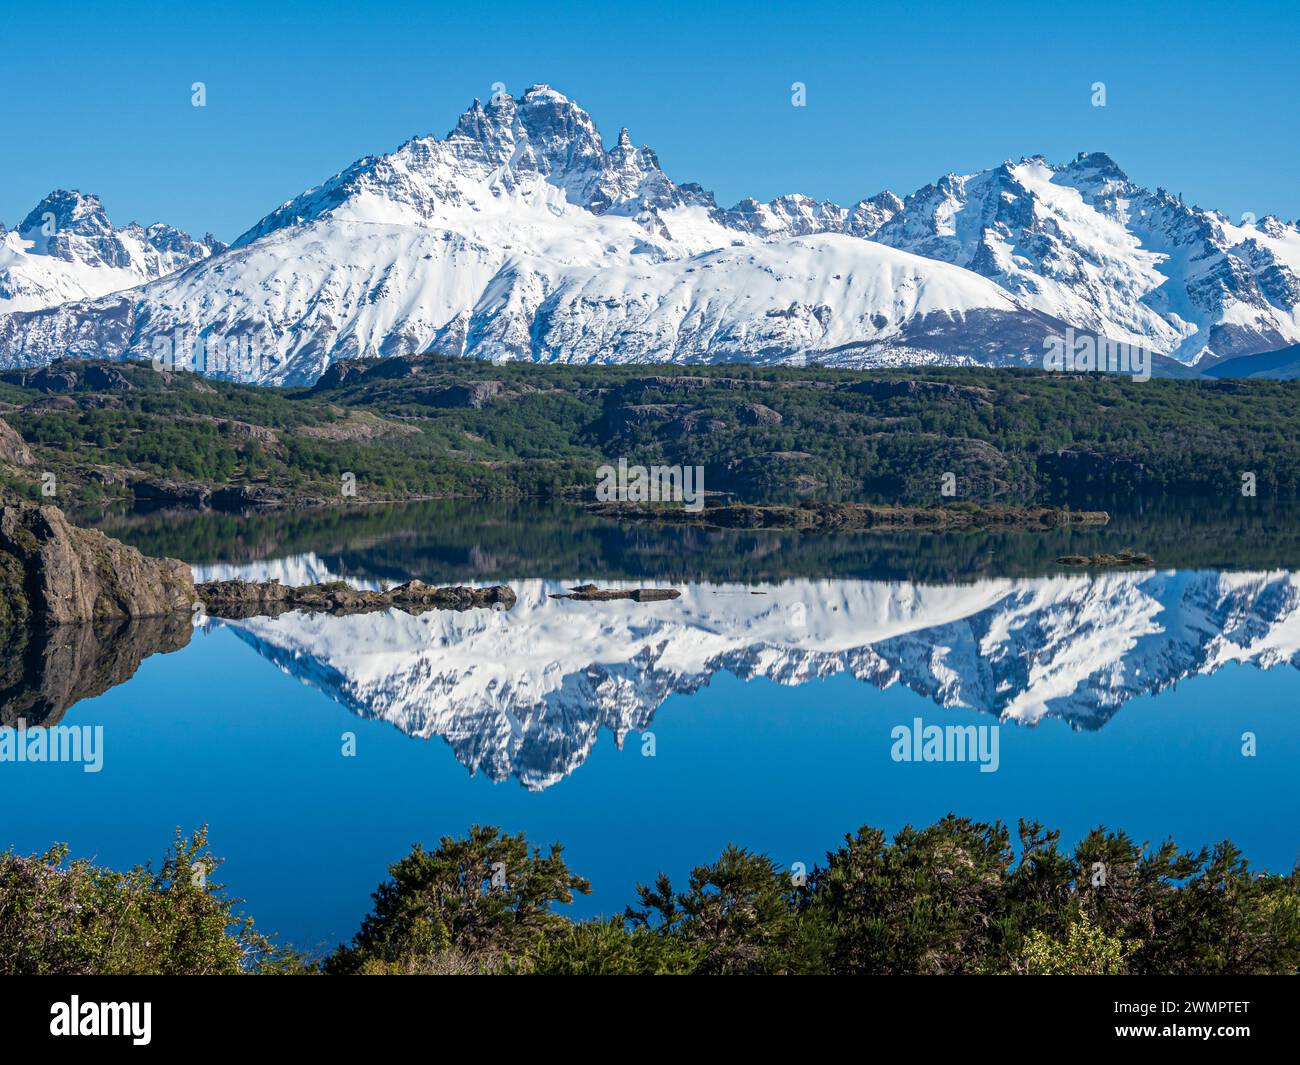 The snow-covered Mt. Cerro Castillo is reflected in a lake, Patagonia, Chile Stock Photo